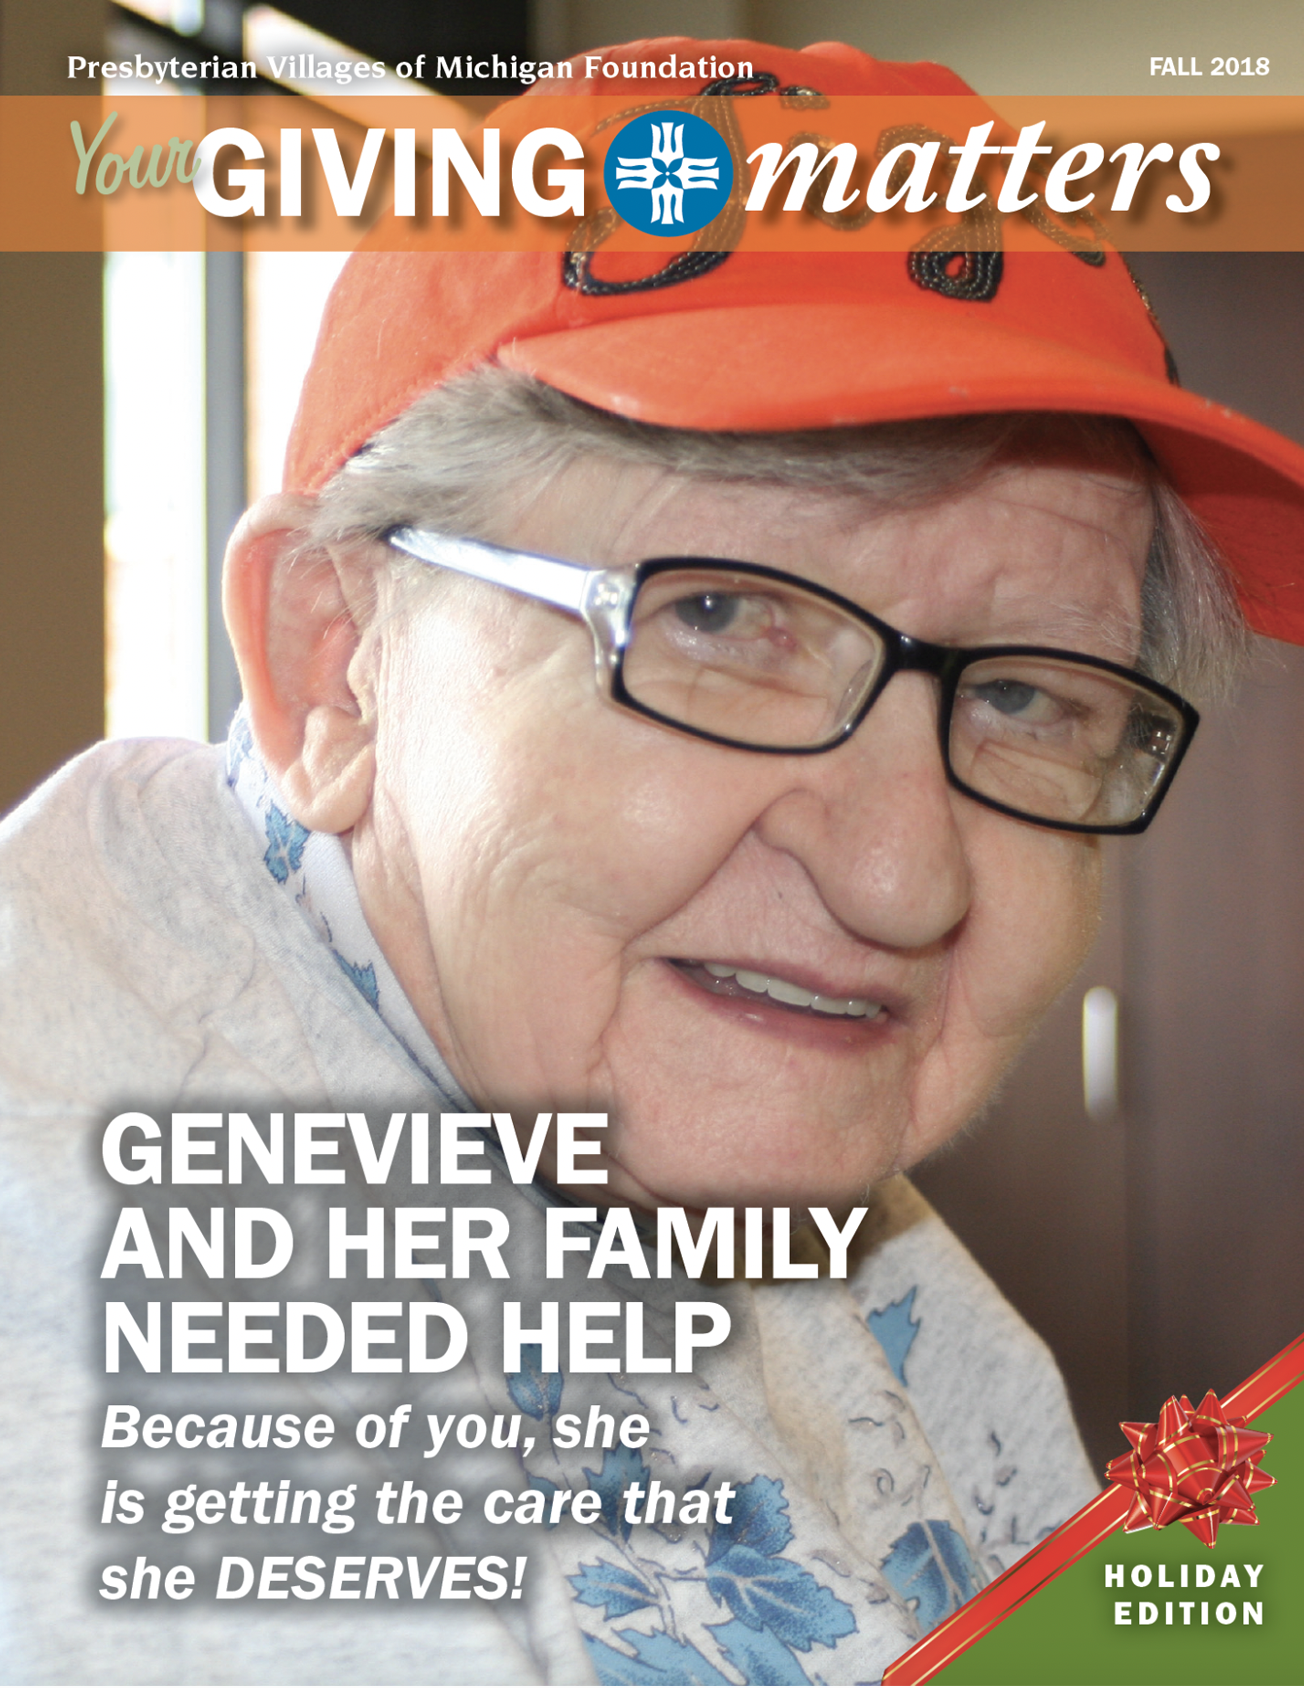 Read the Fall 2018 edition of Your Giving Matters! find out how donors were able to help get Genevieve the care she deserves.